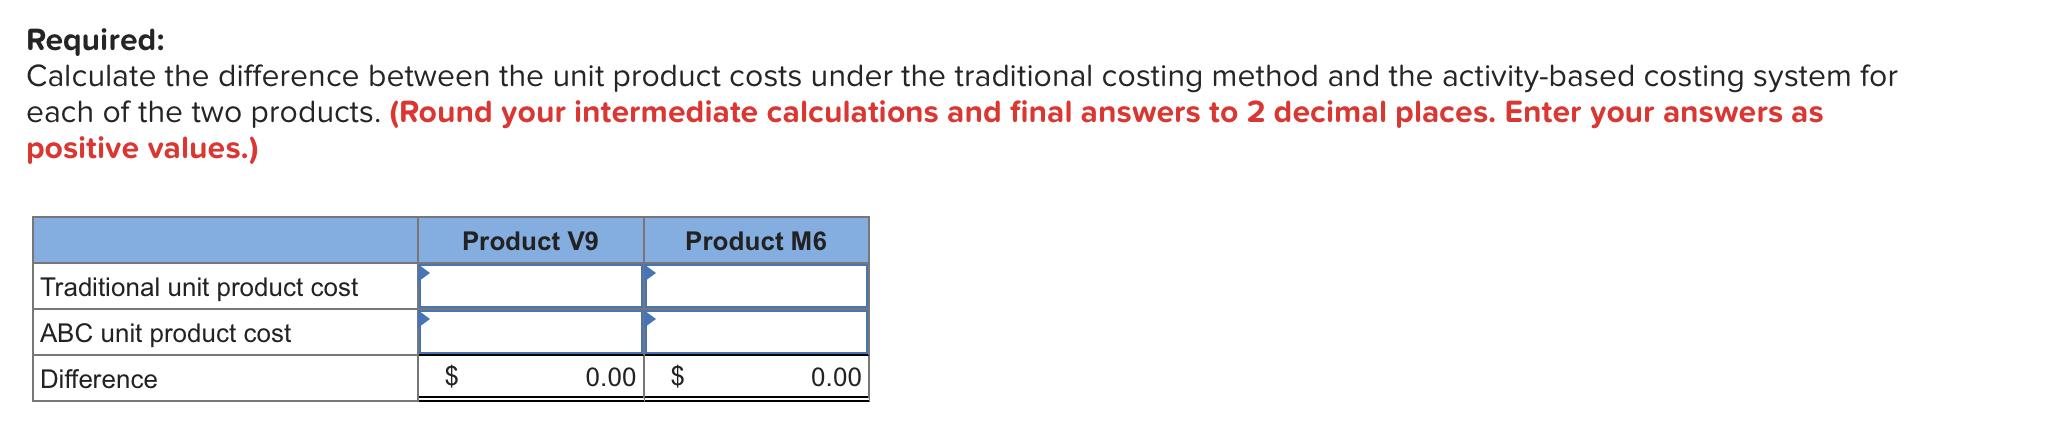 Required: Calculate the difference between the unit product costs under the traditional costing method and the activity-based